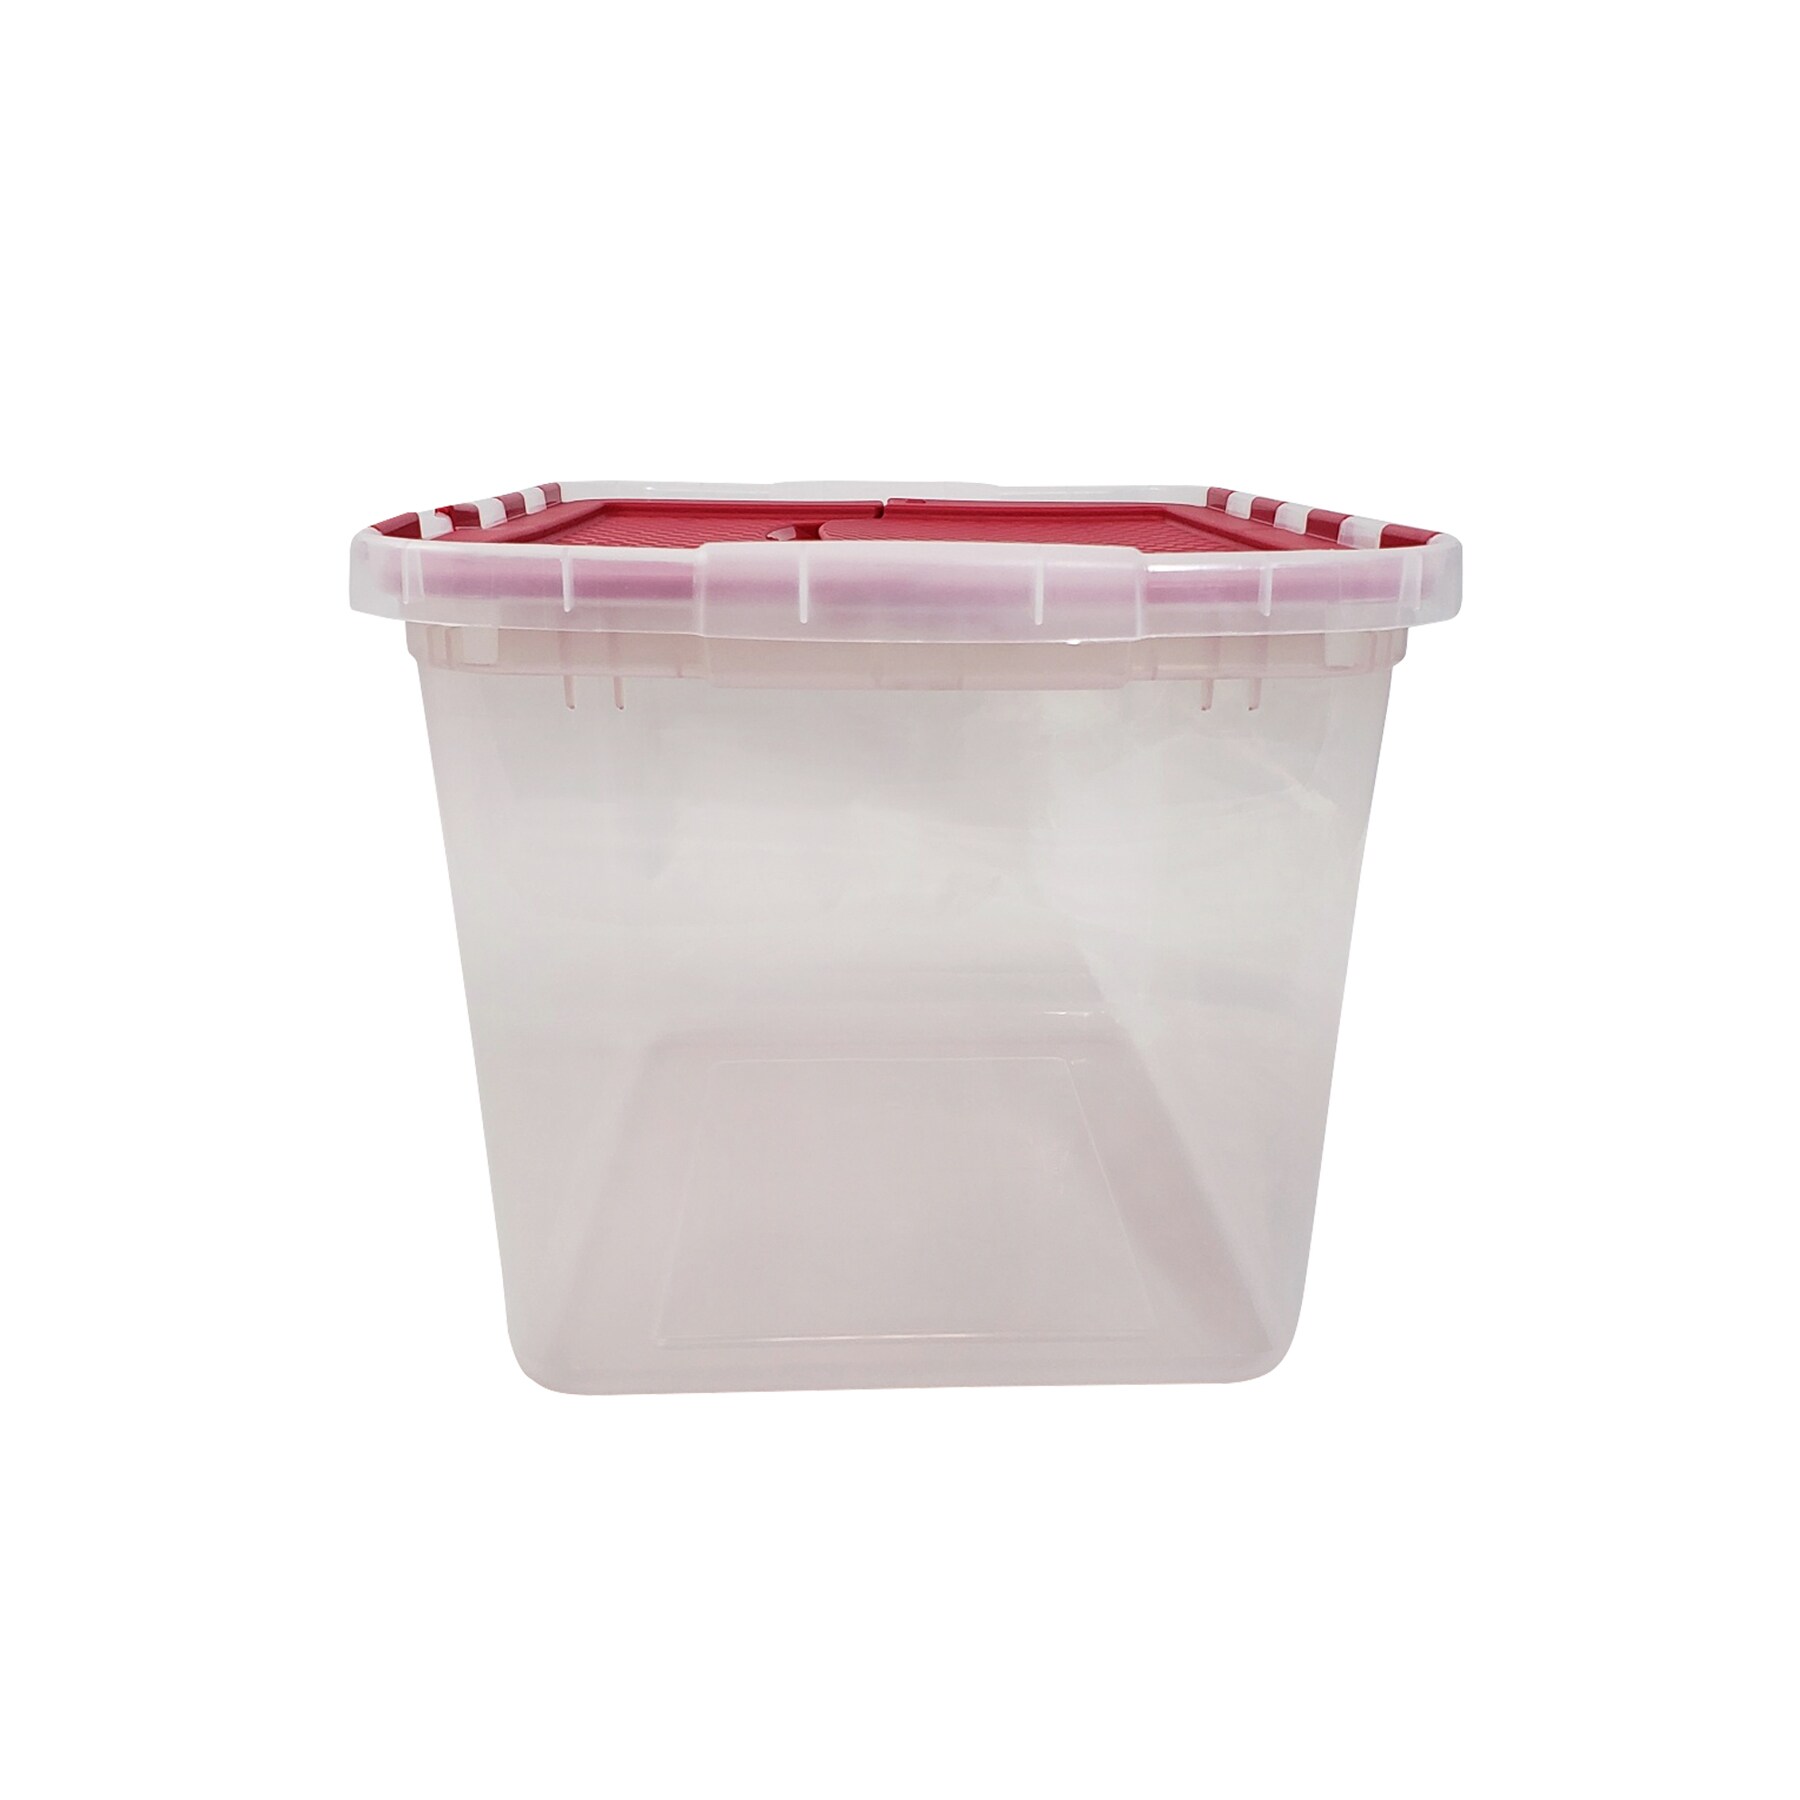 Homz Products Medium 12-Gallons (48-Quart) Red/Clear Heavy Duty